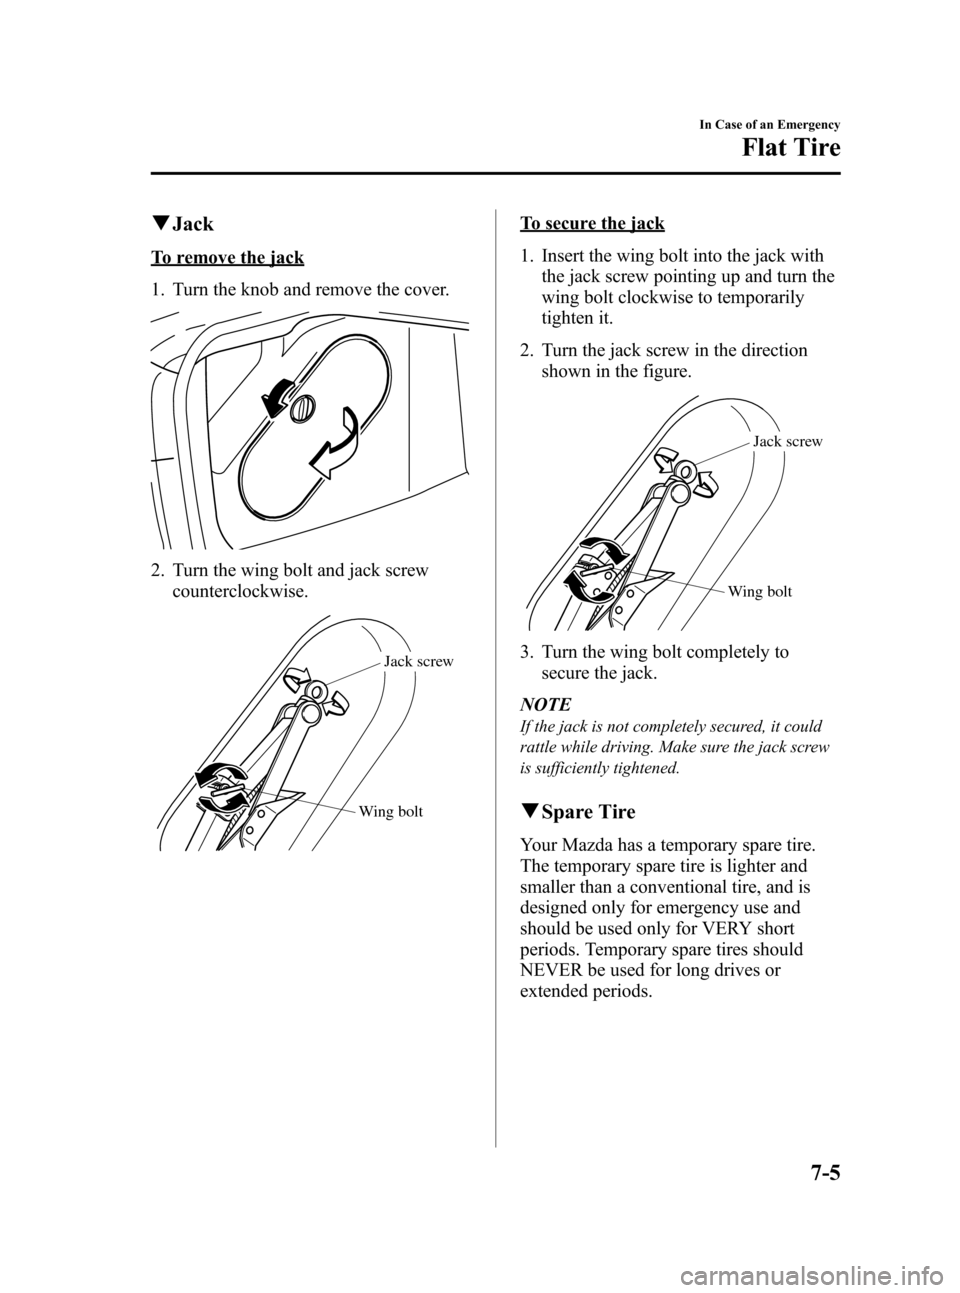 MAZDA MODEL 3 HATCHBACK 2008  Owners Manual (in English) Black plate (249,1)
qJack
To remove the jack
1. Turn the knob and remove the cover.
2. Turn the wing bolt and jack screw
counterclockwise.
Wing boltJack screw
To secure the jack
1. Insert the wing bol